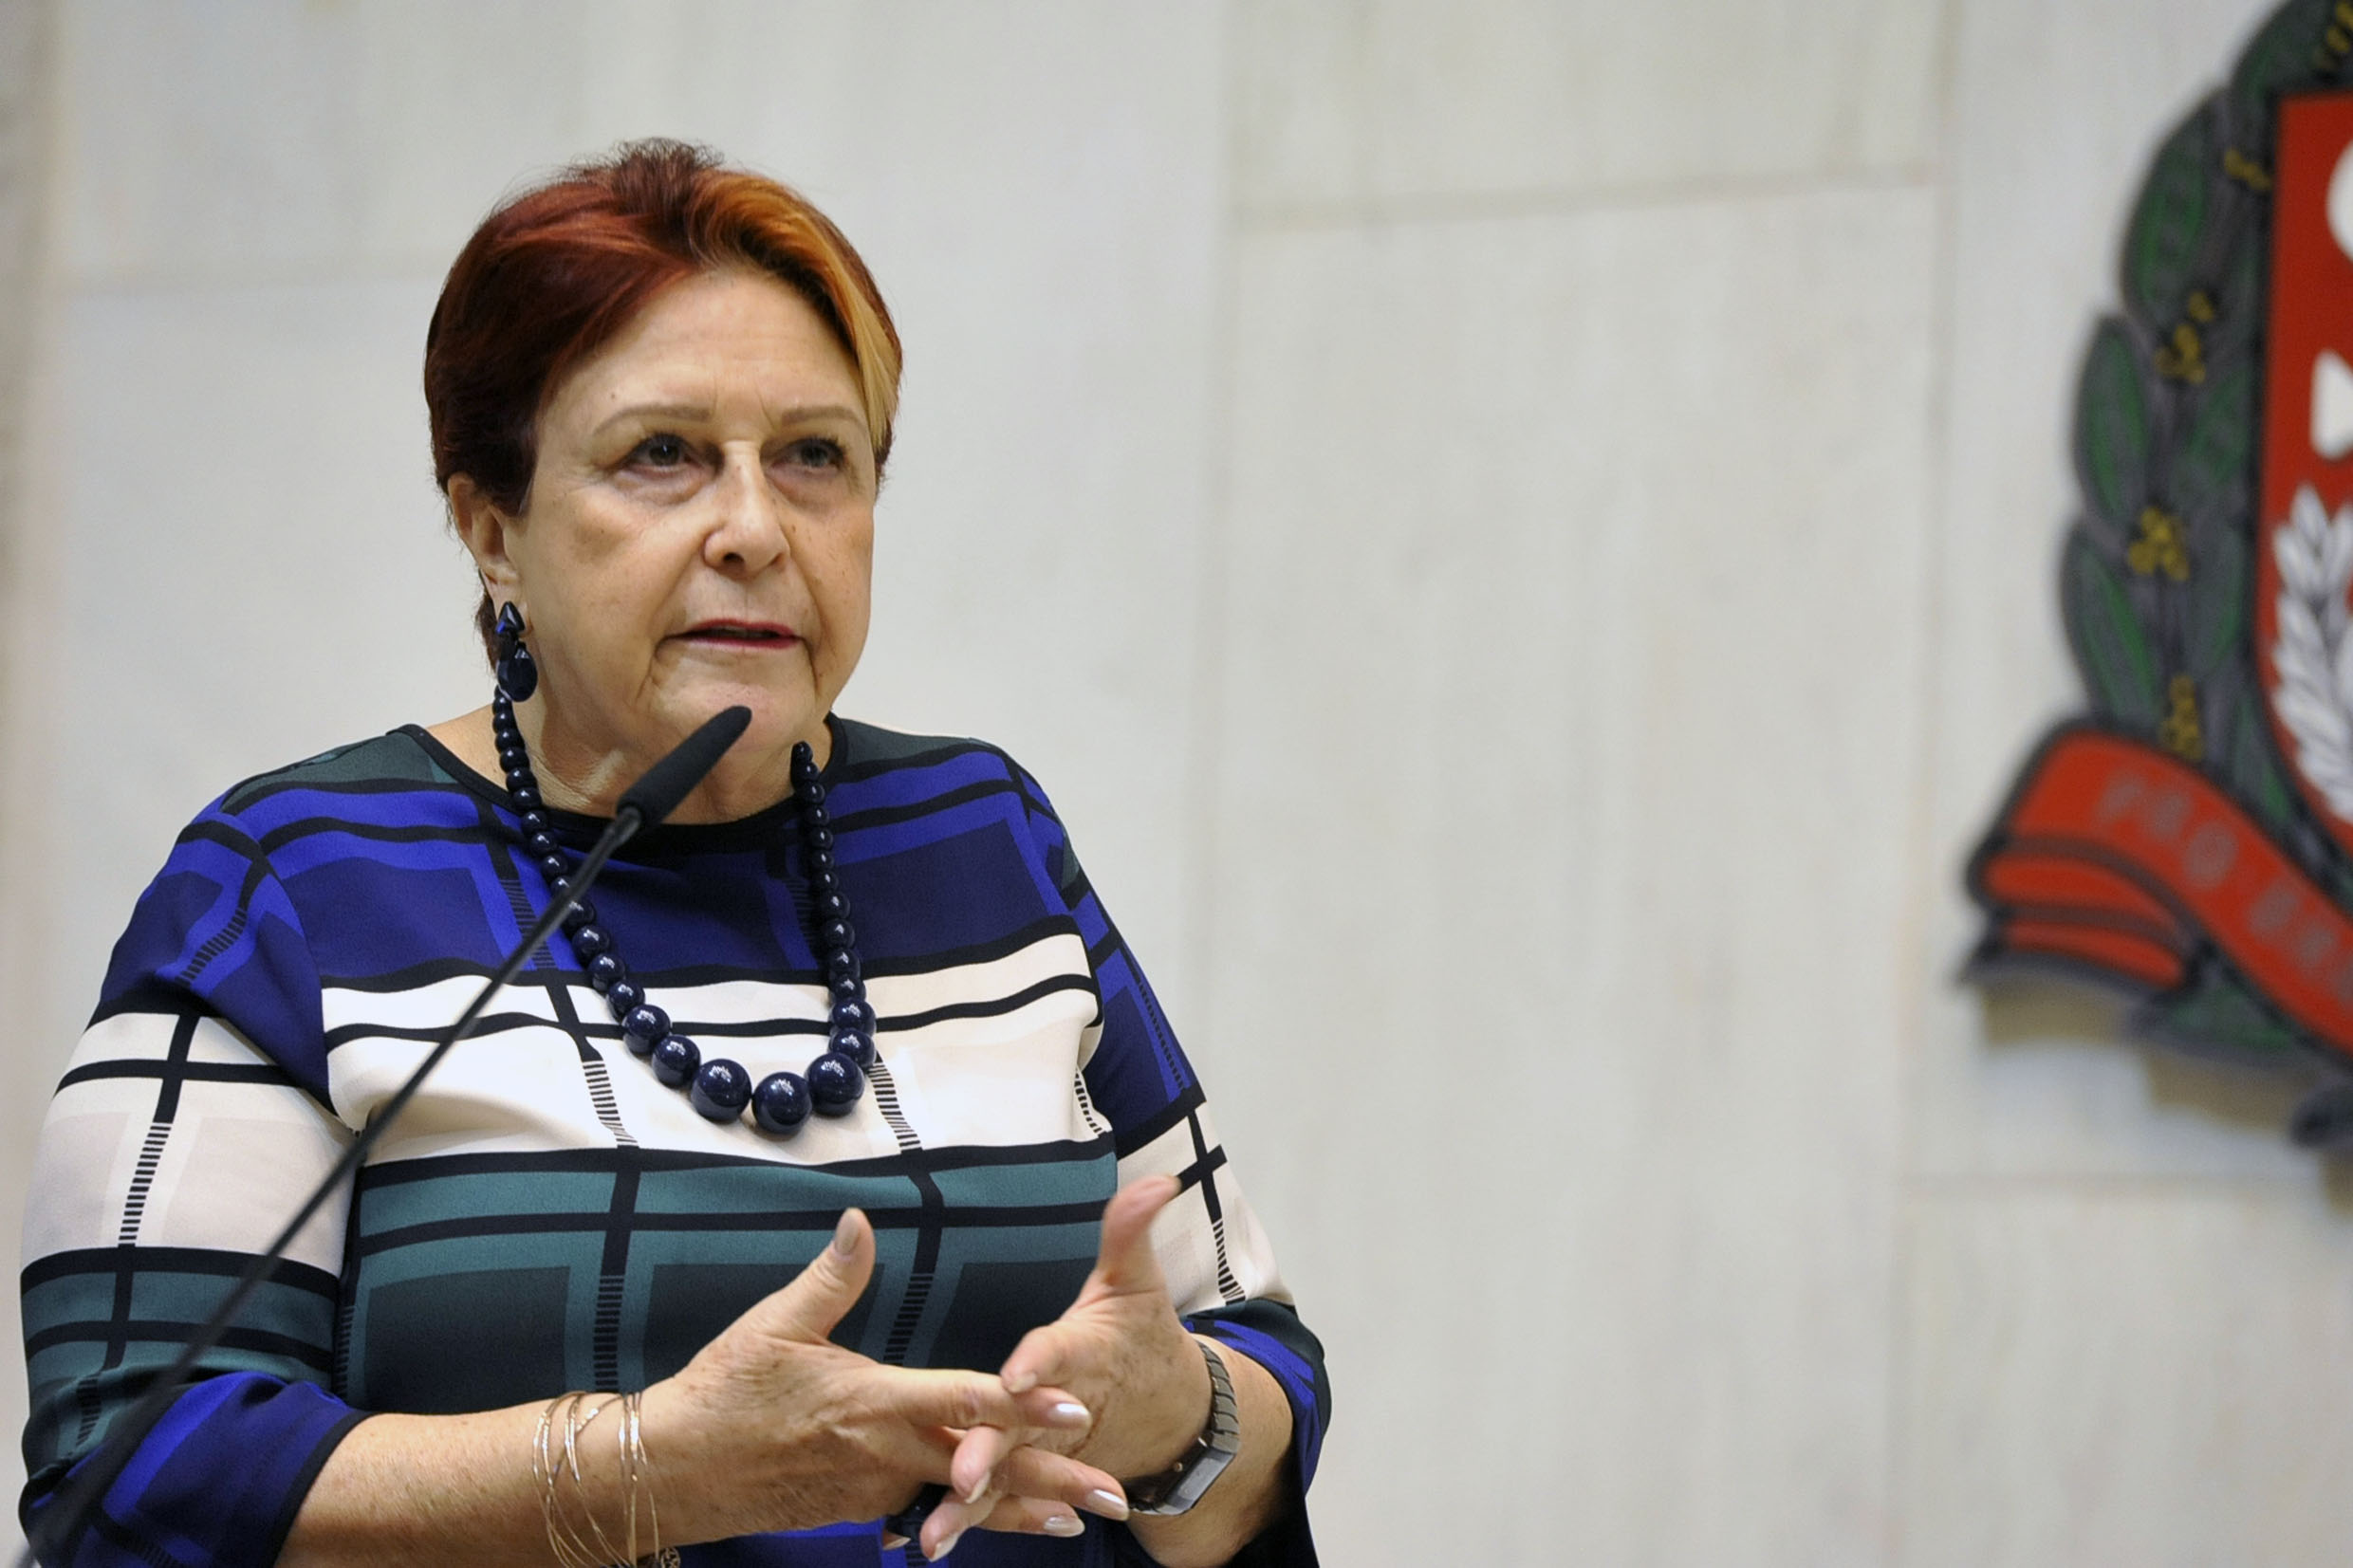 Edna Macedo<a style='float:right' href='https://www3.al.sp.gov.br/repositorio/noticia/N-06-2020/fg249479.jpg' target=_blank><img src='/_img/material-file-download-white.png' width='14px' alt='Clique para baixar a imagem'></a>